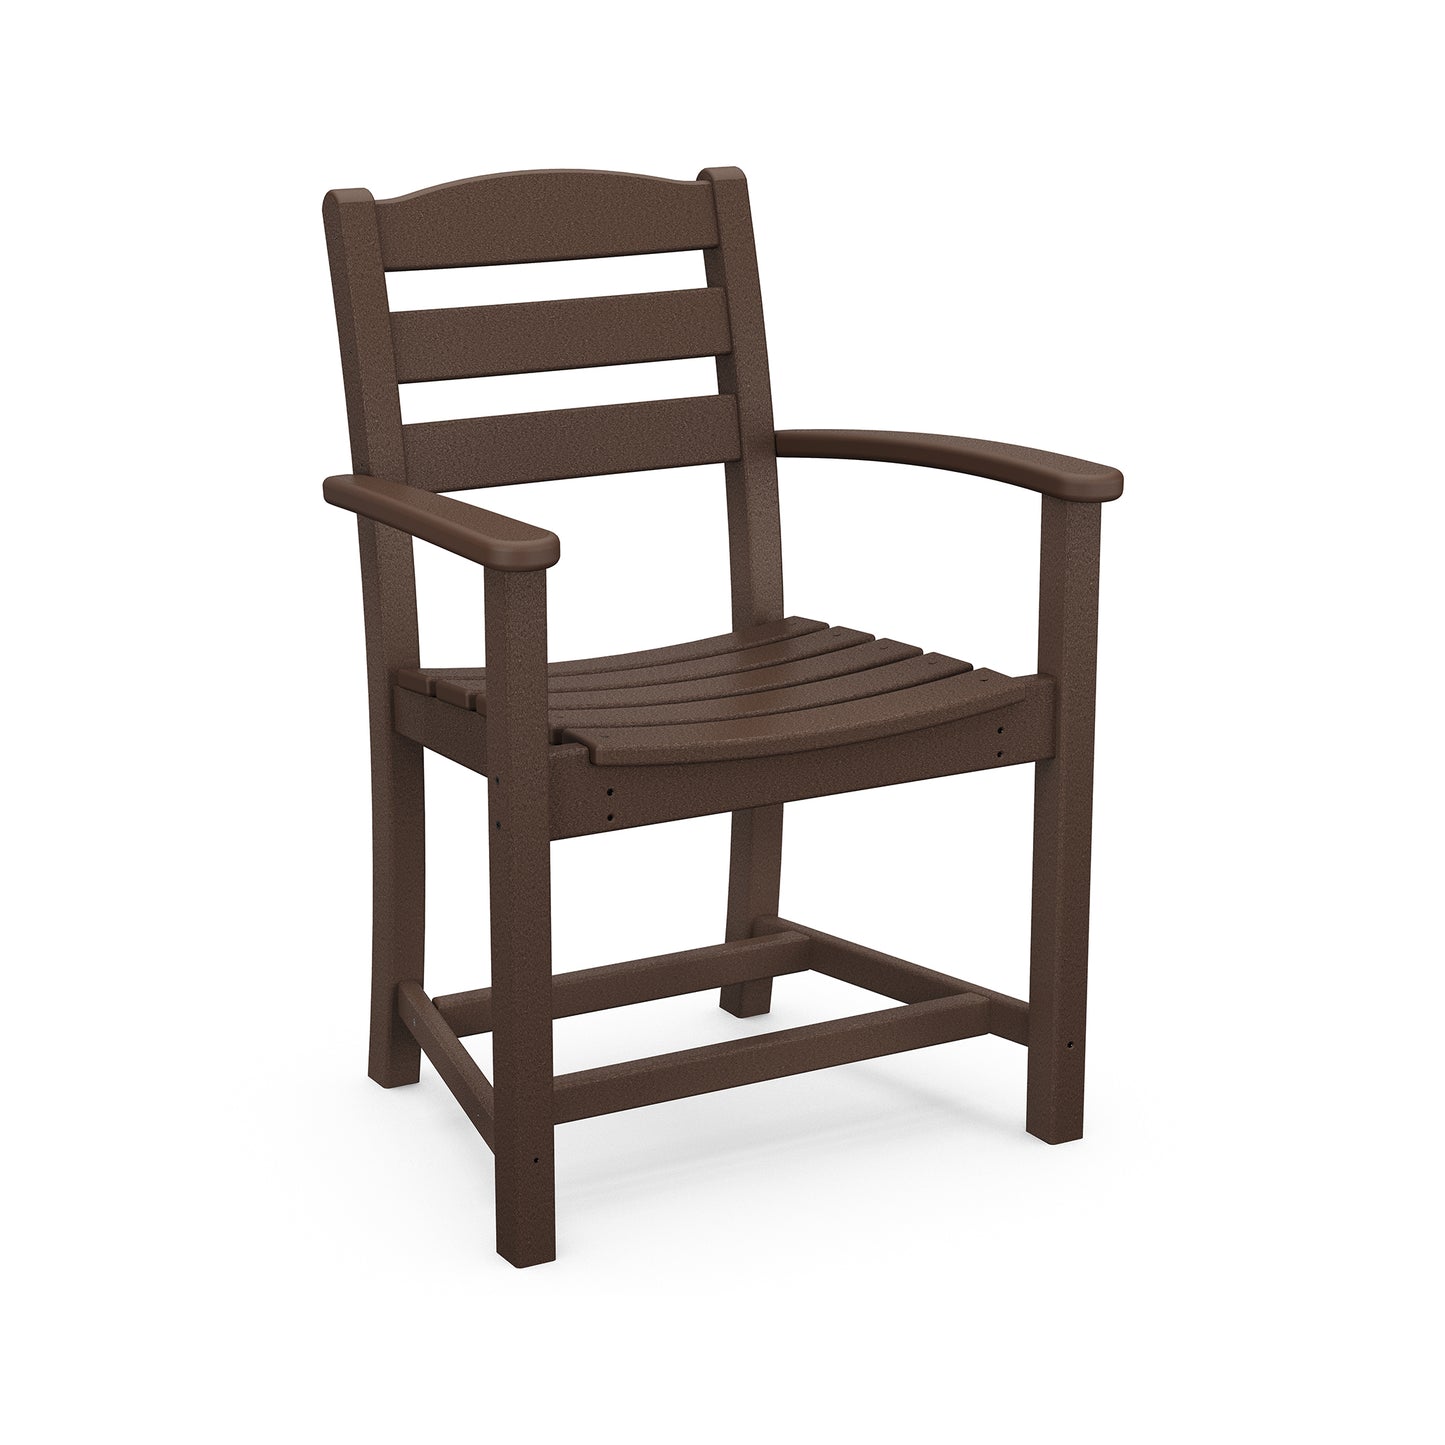 A brown plastic POLYWOOD La Casa Cafe Outdoor Dining Arm Chair with a tall back and wide armrests, designed for outdoor patio furniture use, isolated on a white background.